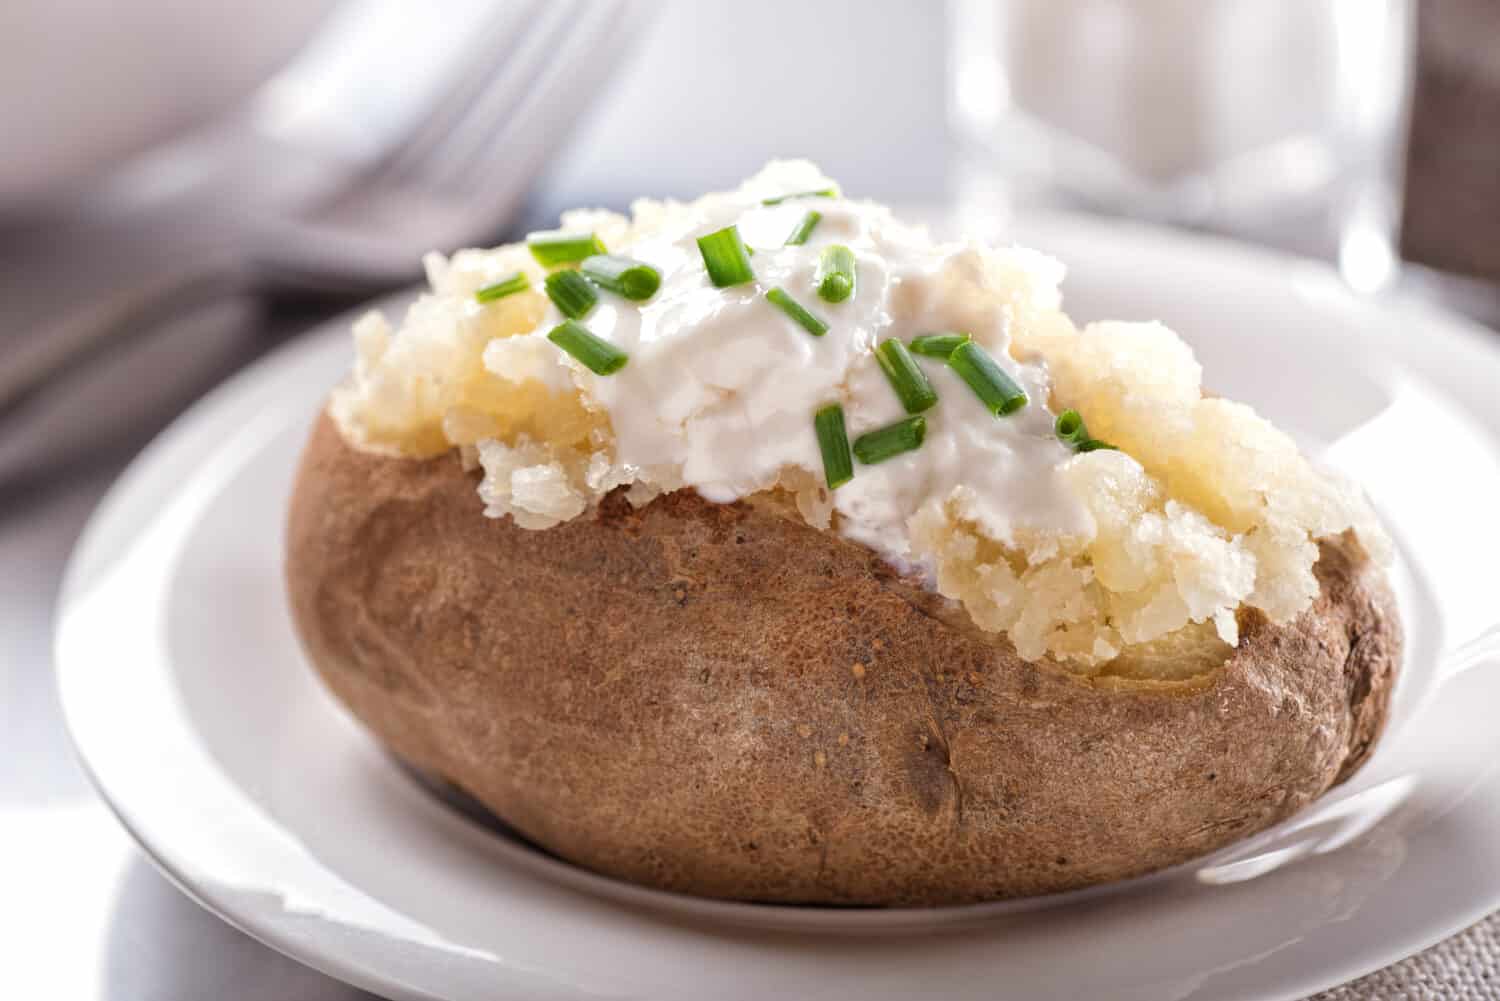 A delicious oven baked potato with sour cream and chives.